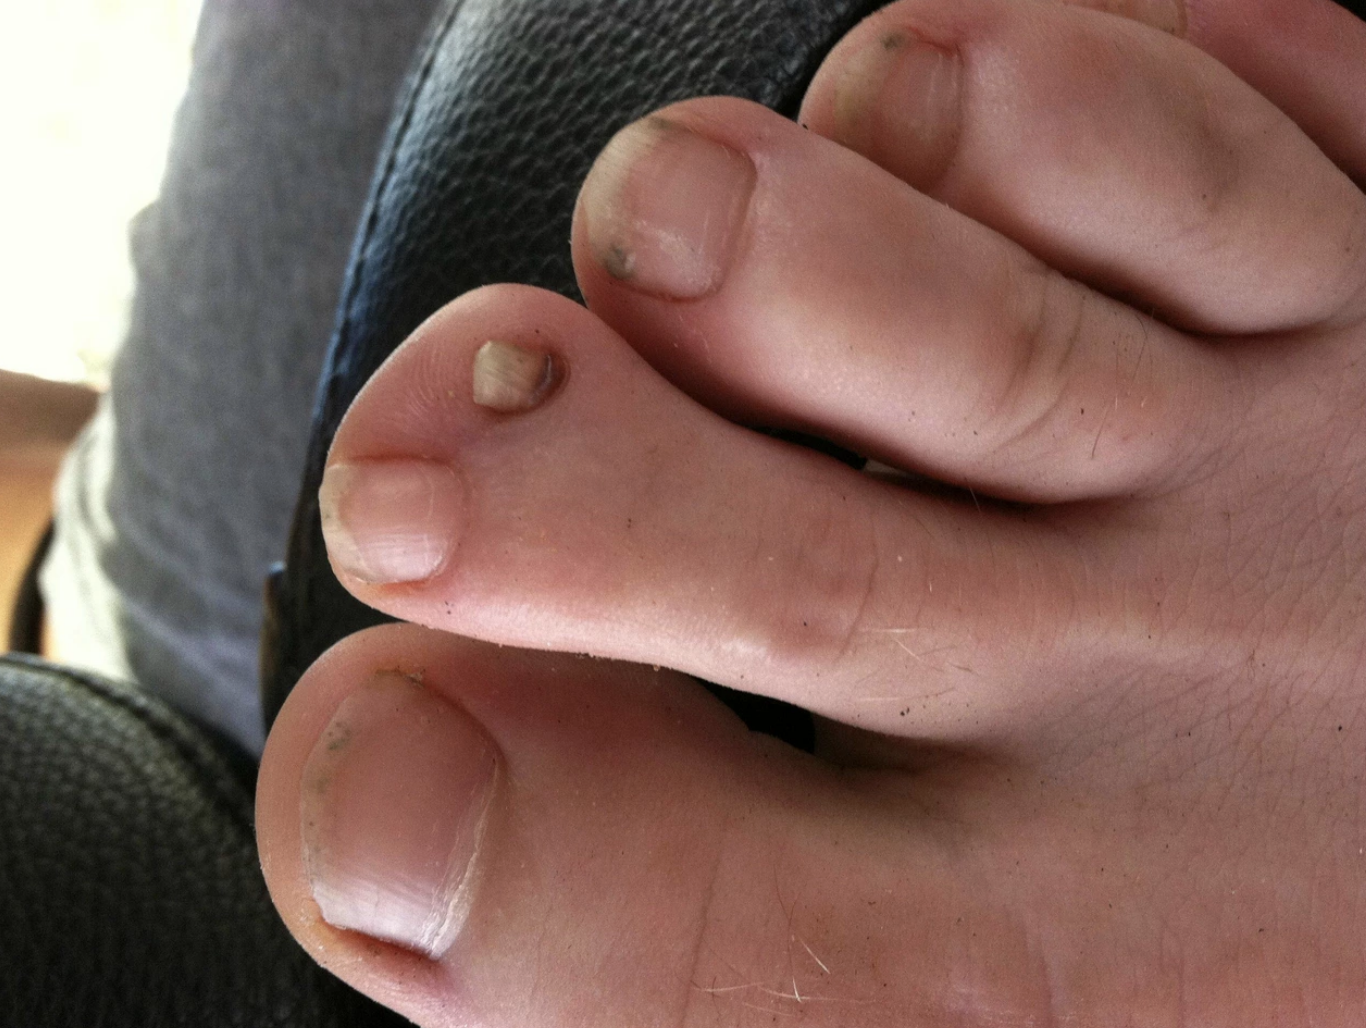 Two small toenails on one larger toe, with no nail in the center